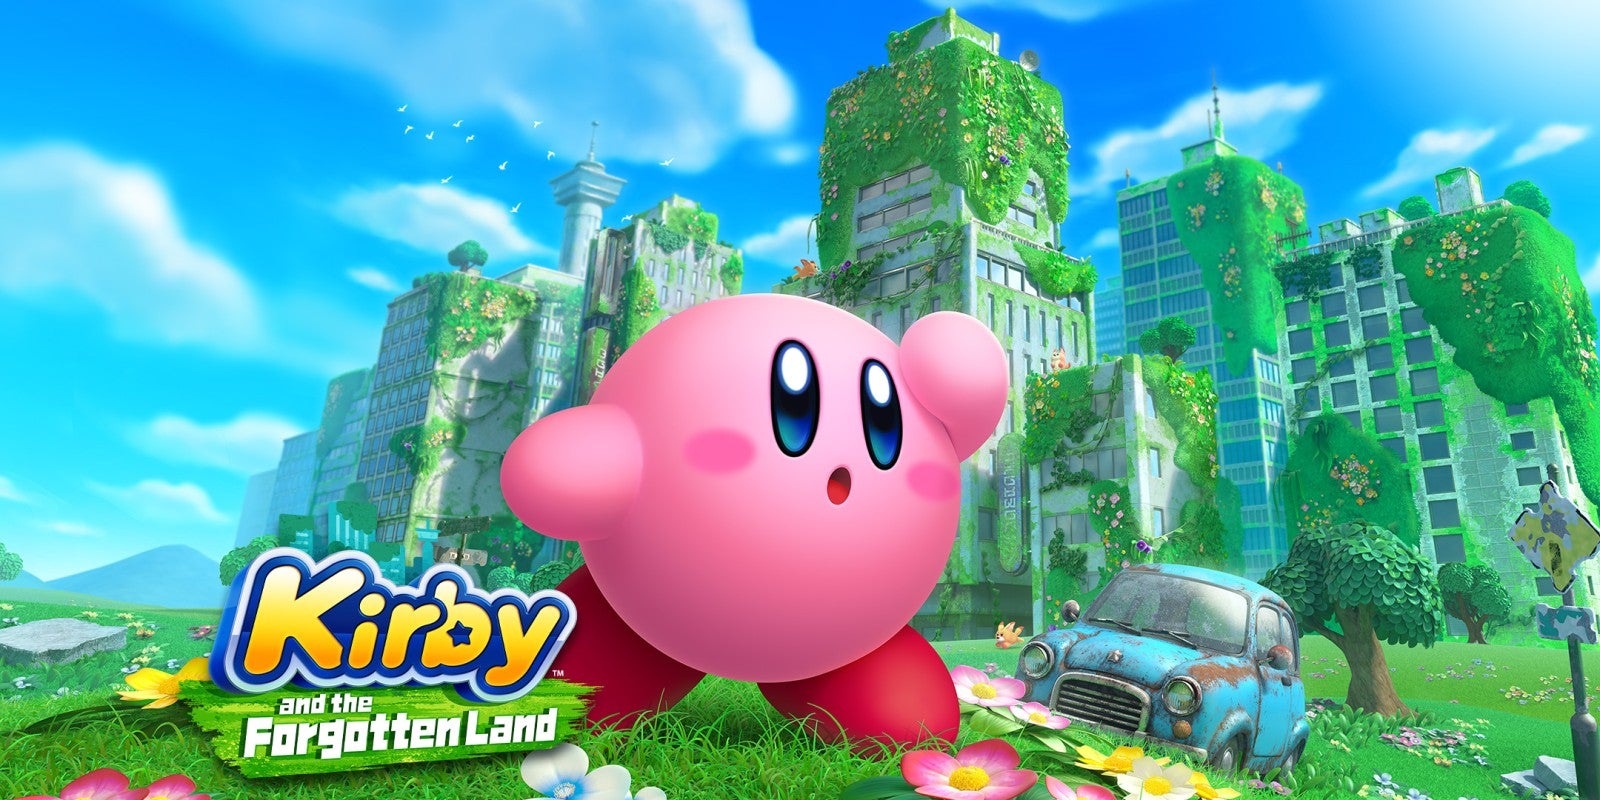 Image for Save 15 per cent when you pre-order Kirby and the Forgotten Land at Currys